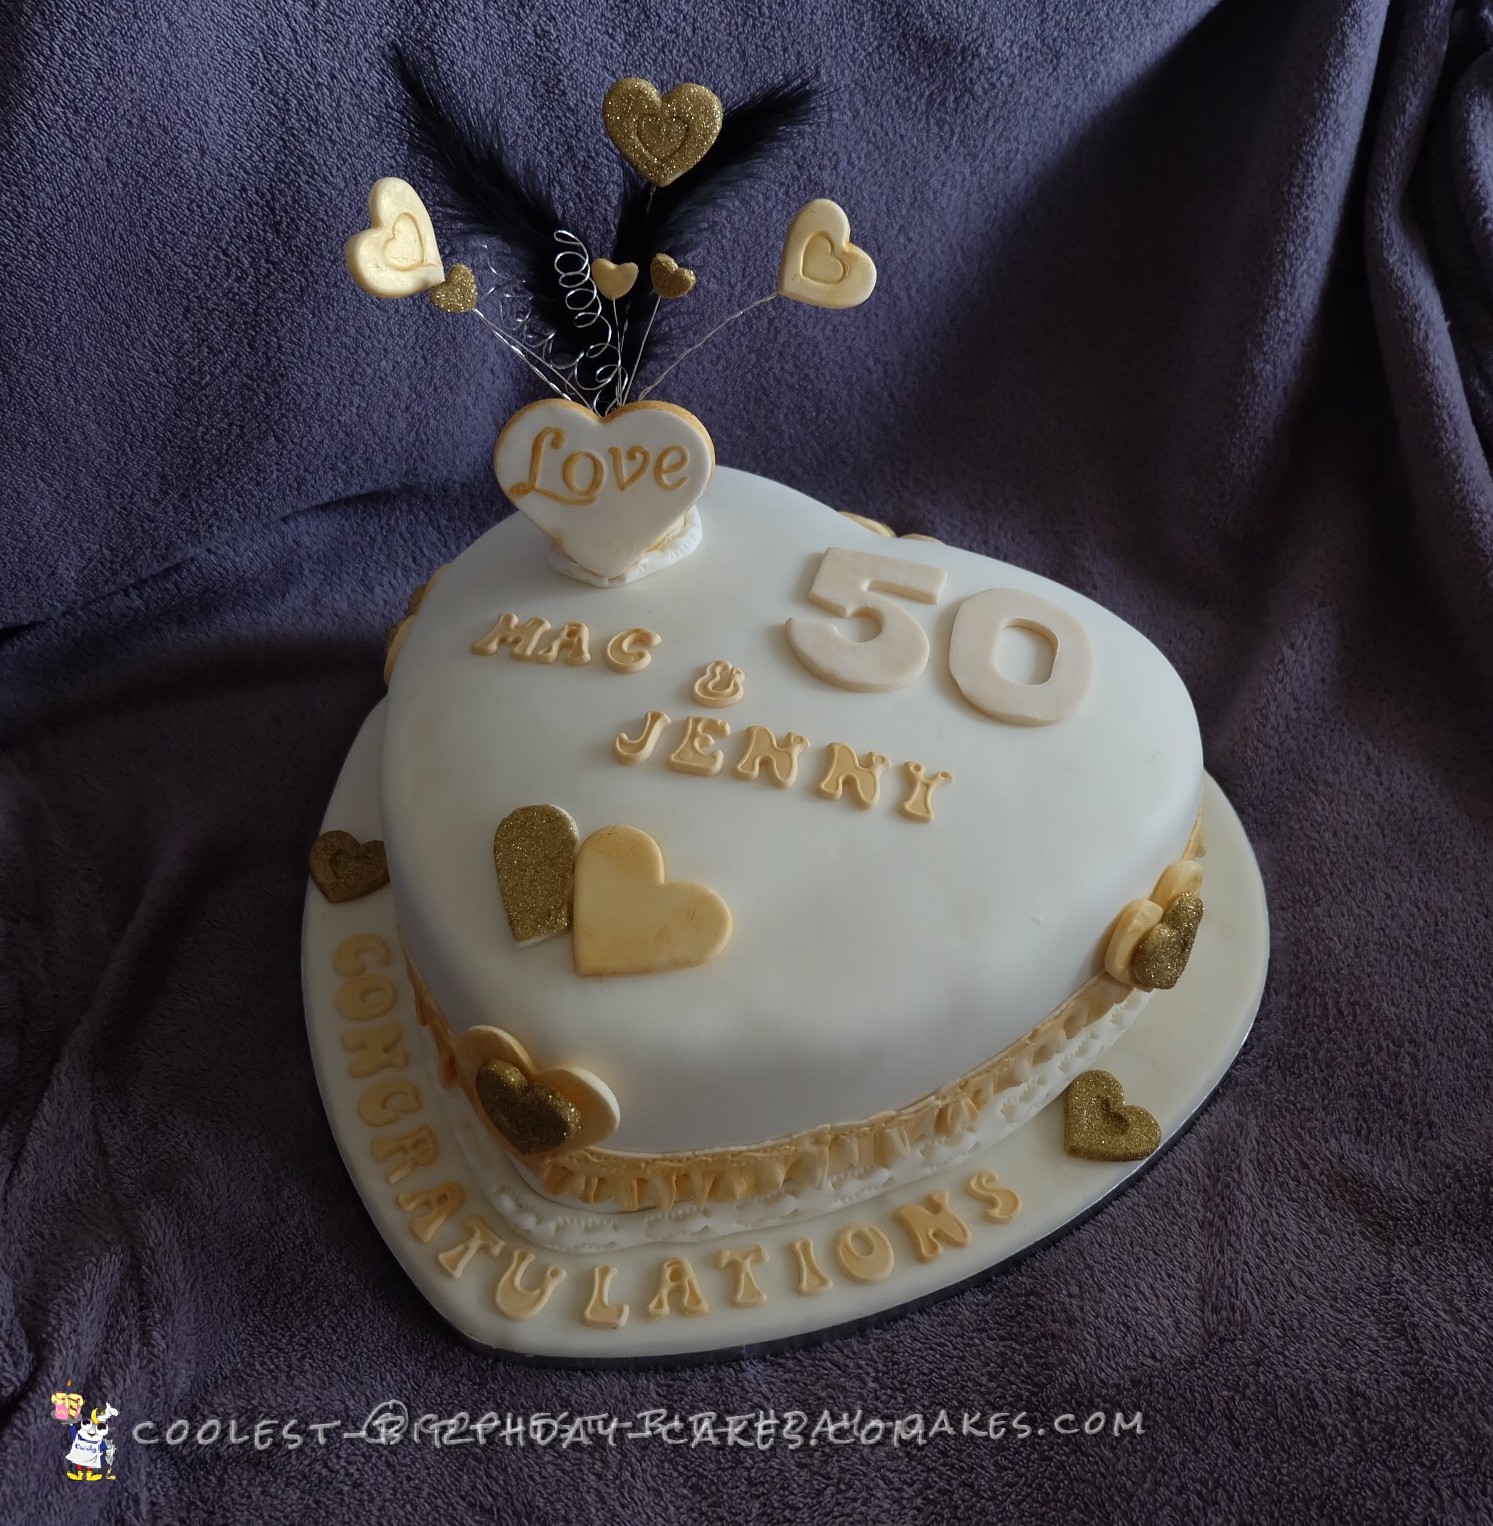 20 Perfect Anniversary Cake Ideas, Designs, and Themes – Instacart